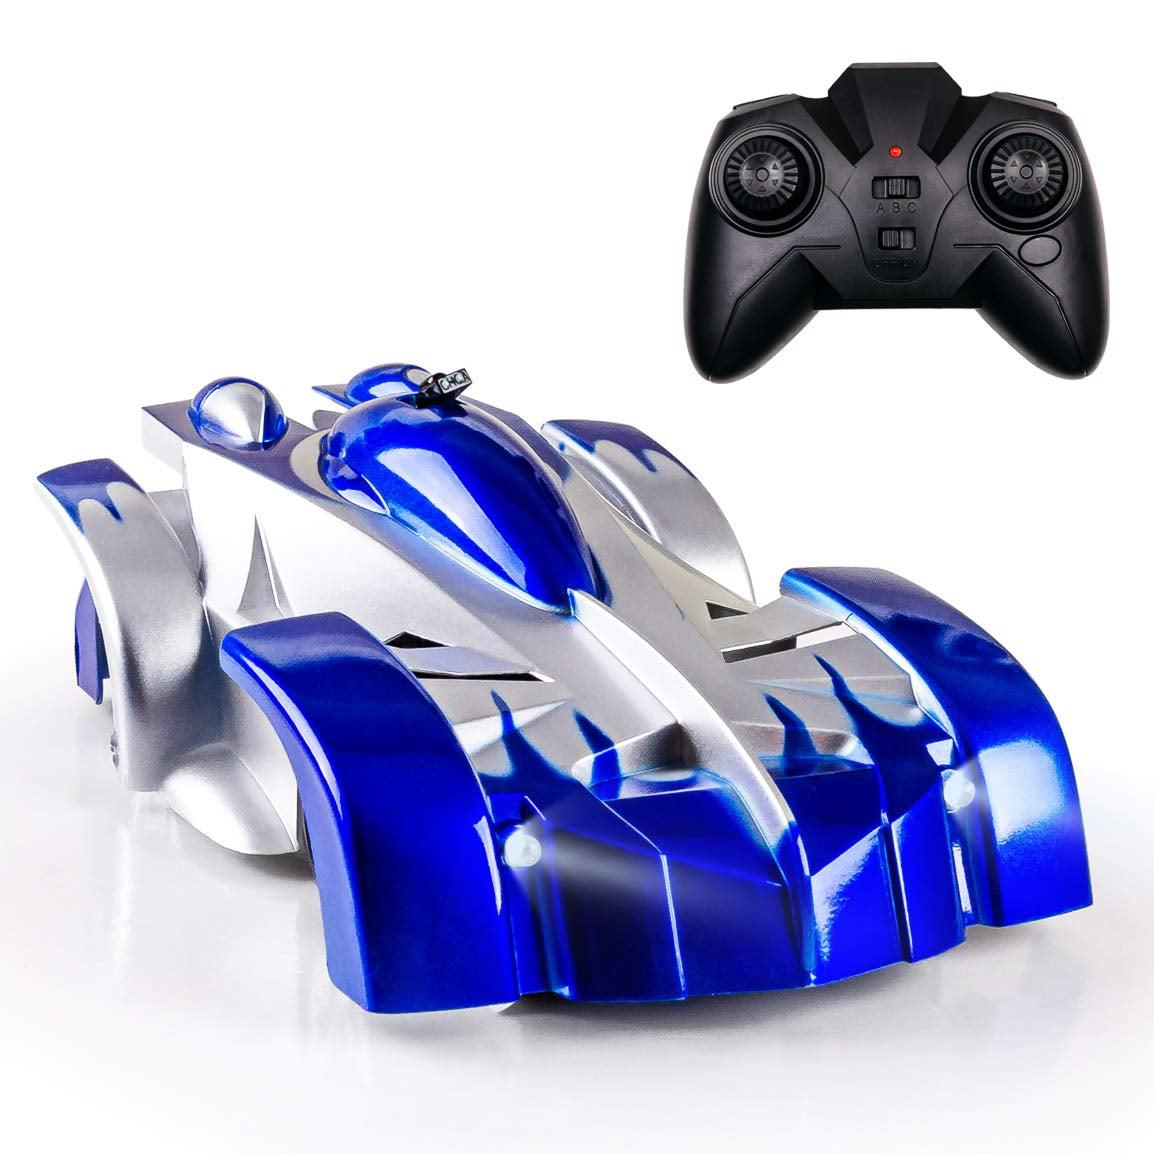 Anti Gravity Rc Car: Anti-Gravity RC Car: Design, Technology, and Features